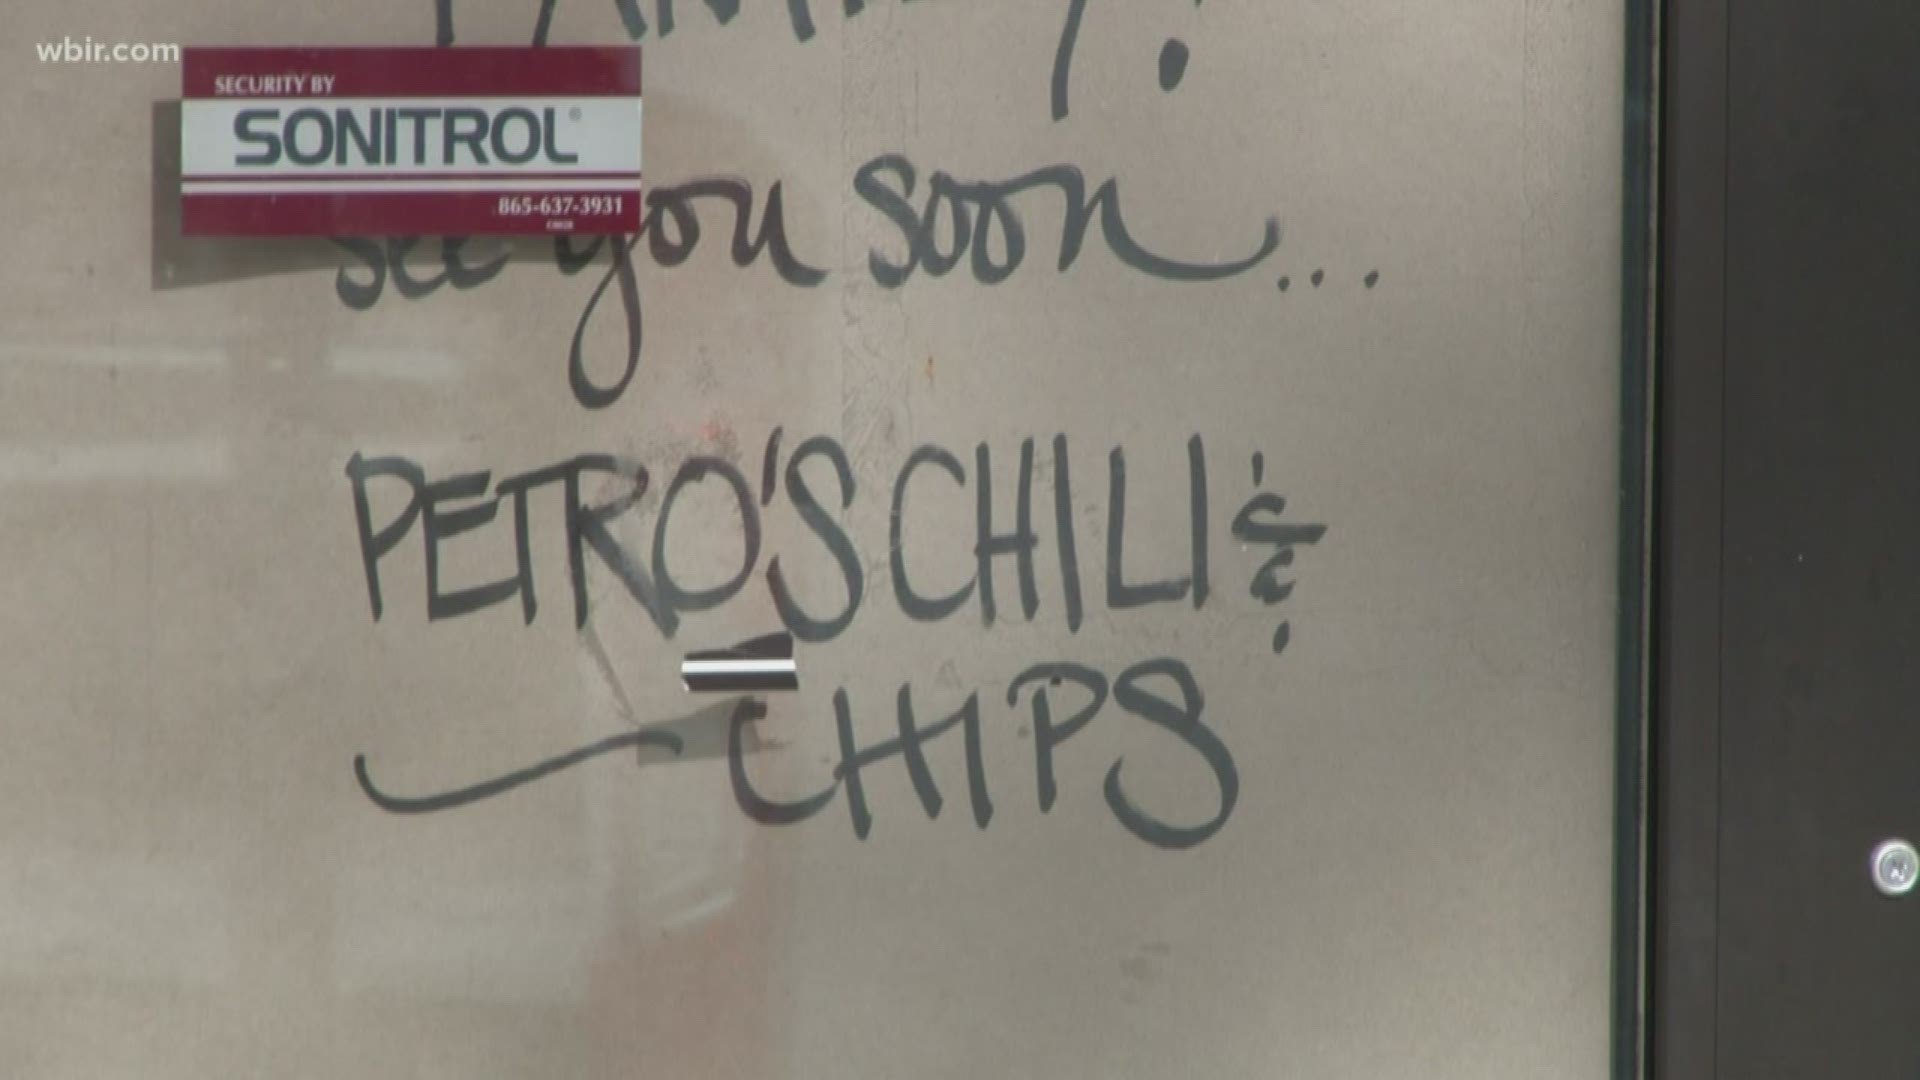 A new Petro's Chili and Chips will soon open in downtown Knoxville.